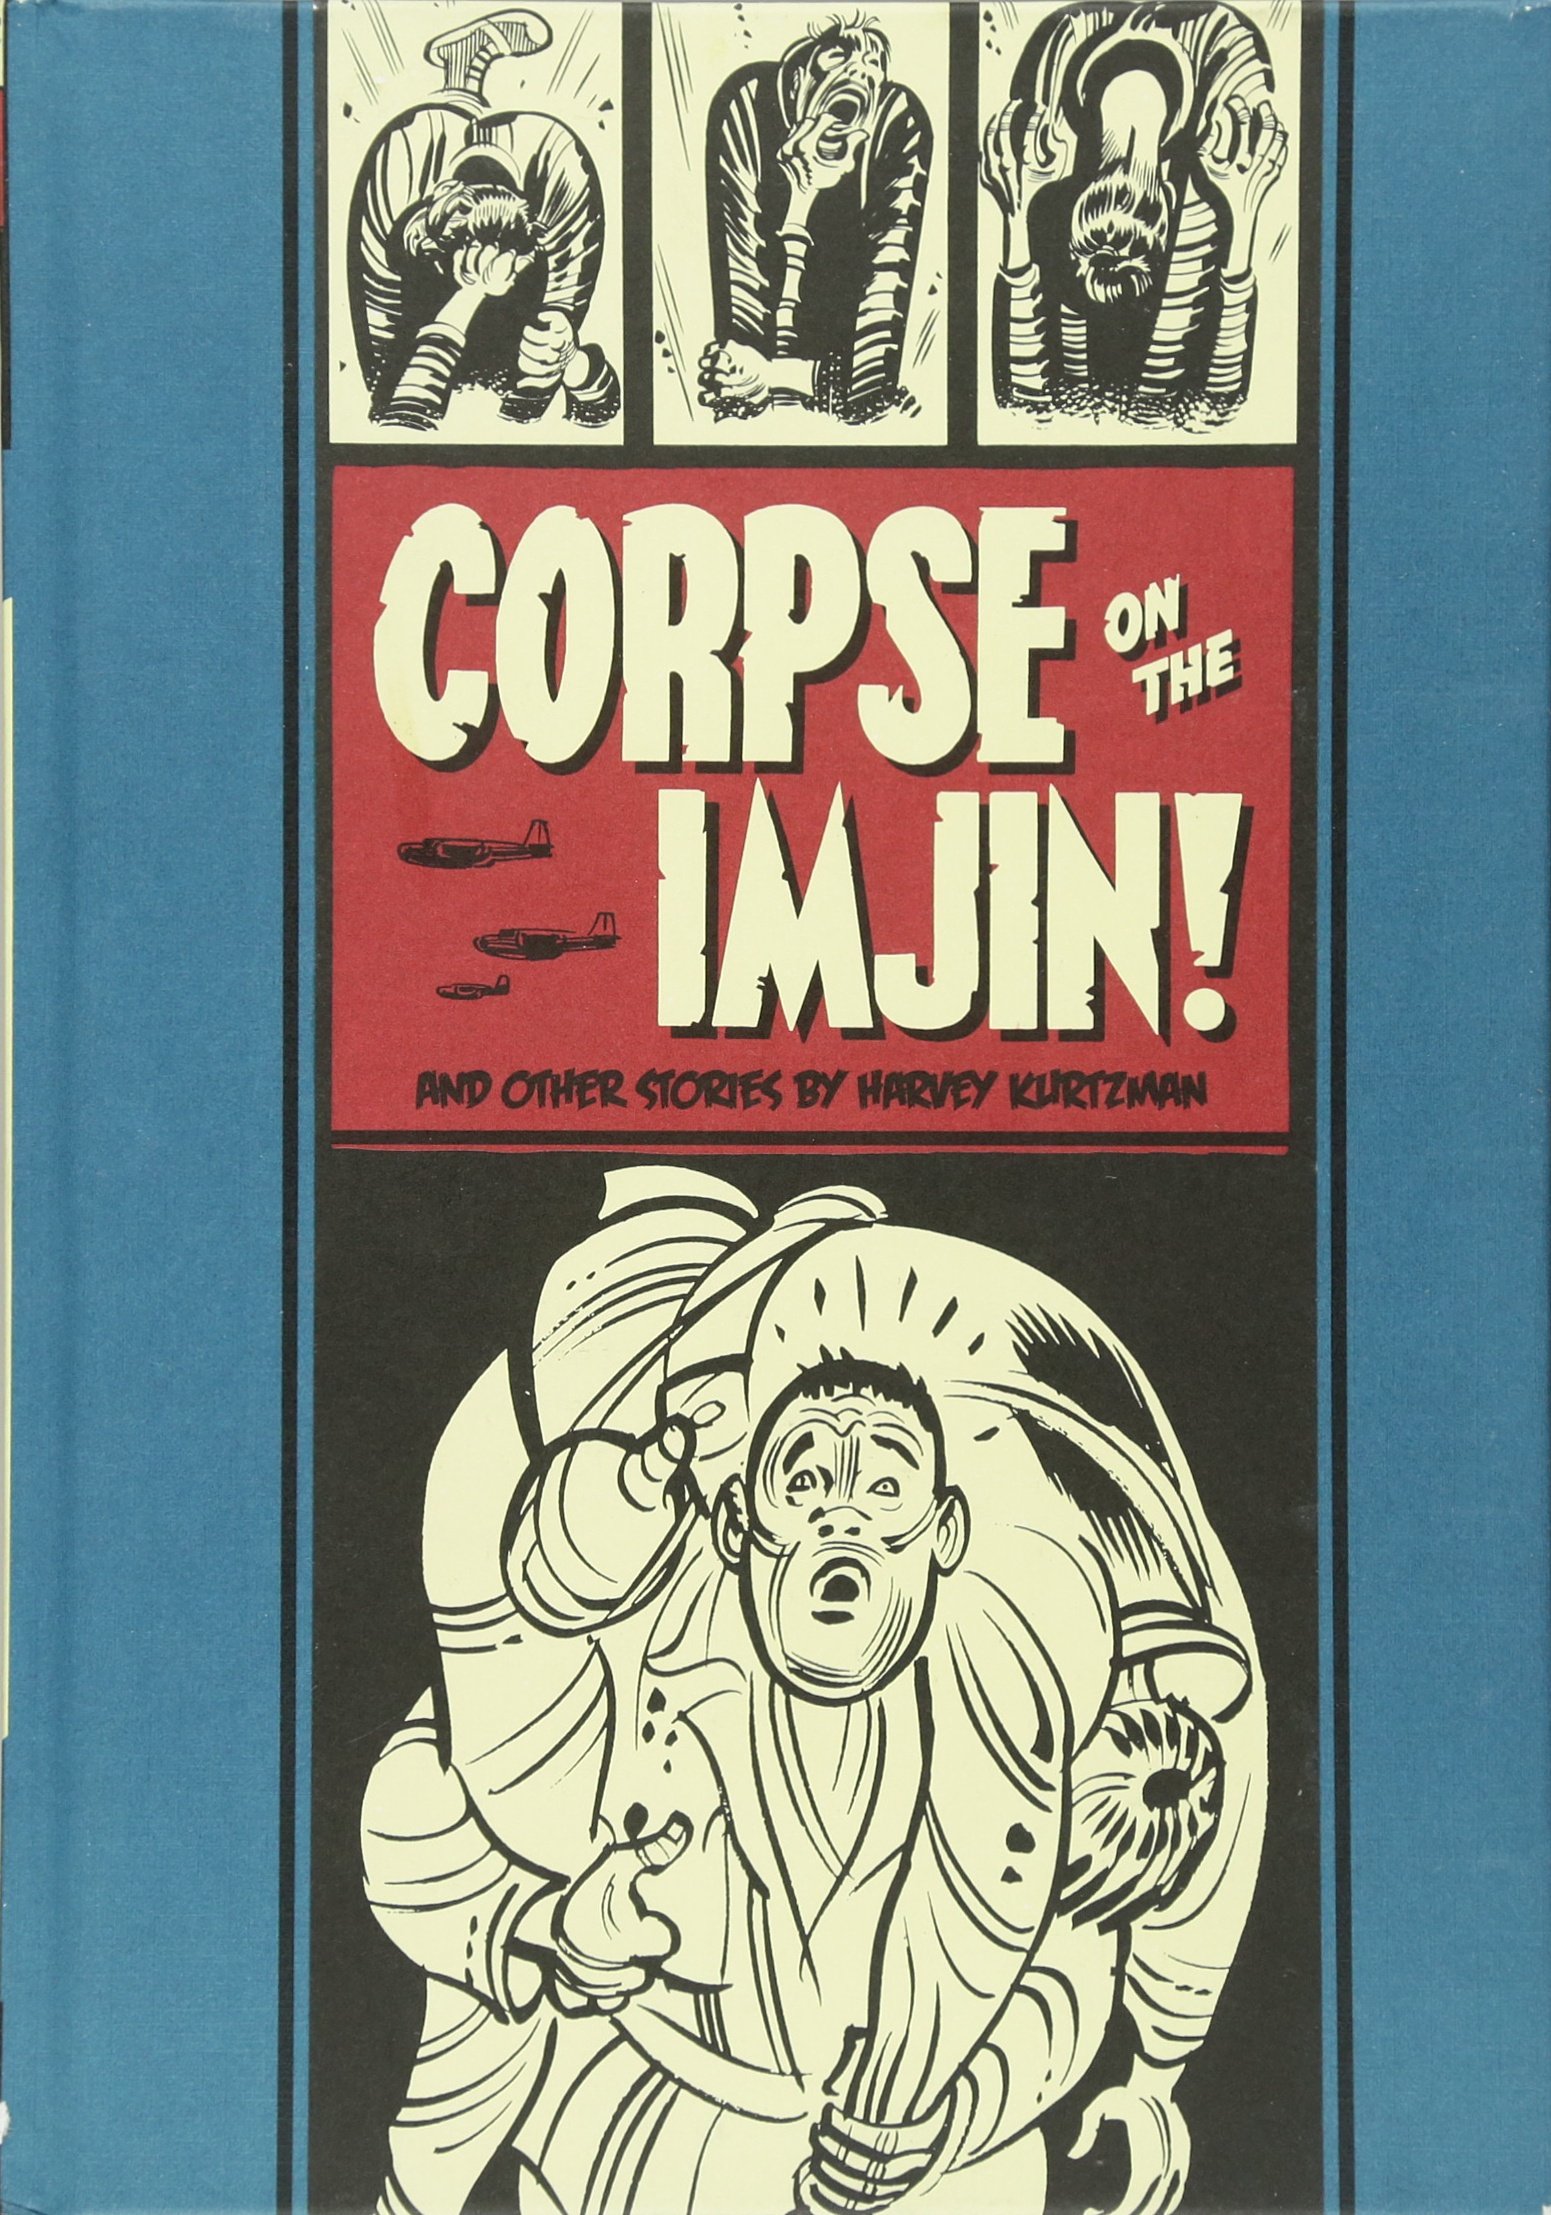 Corpse on the Imjin! and Other Stories